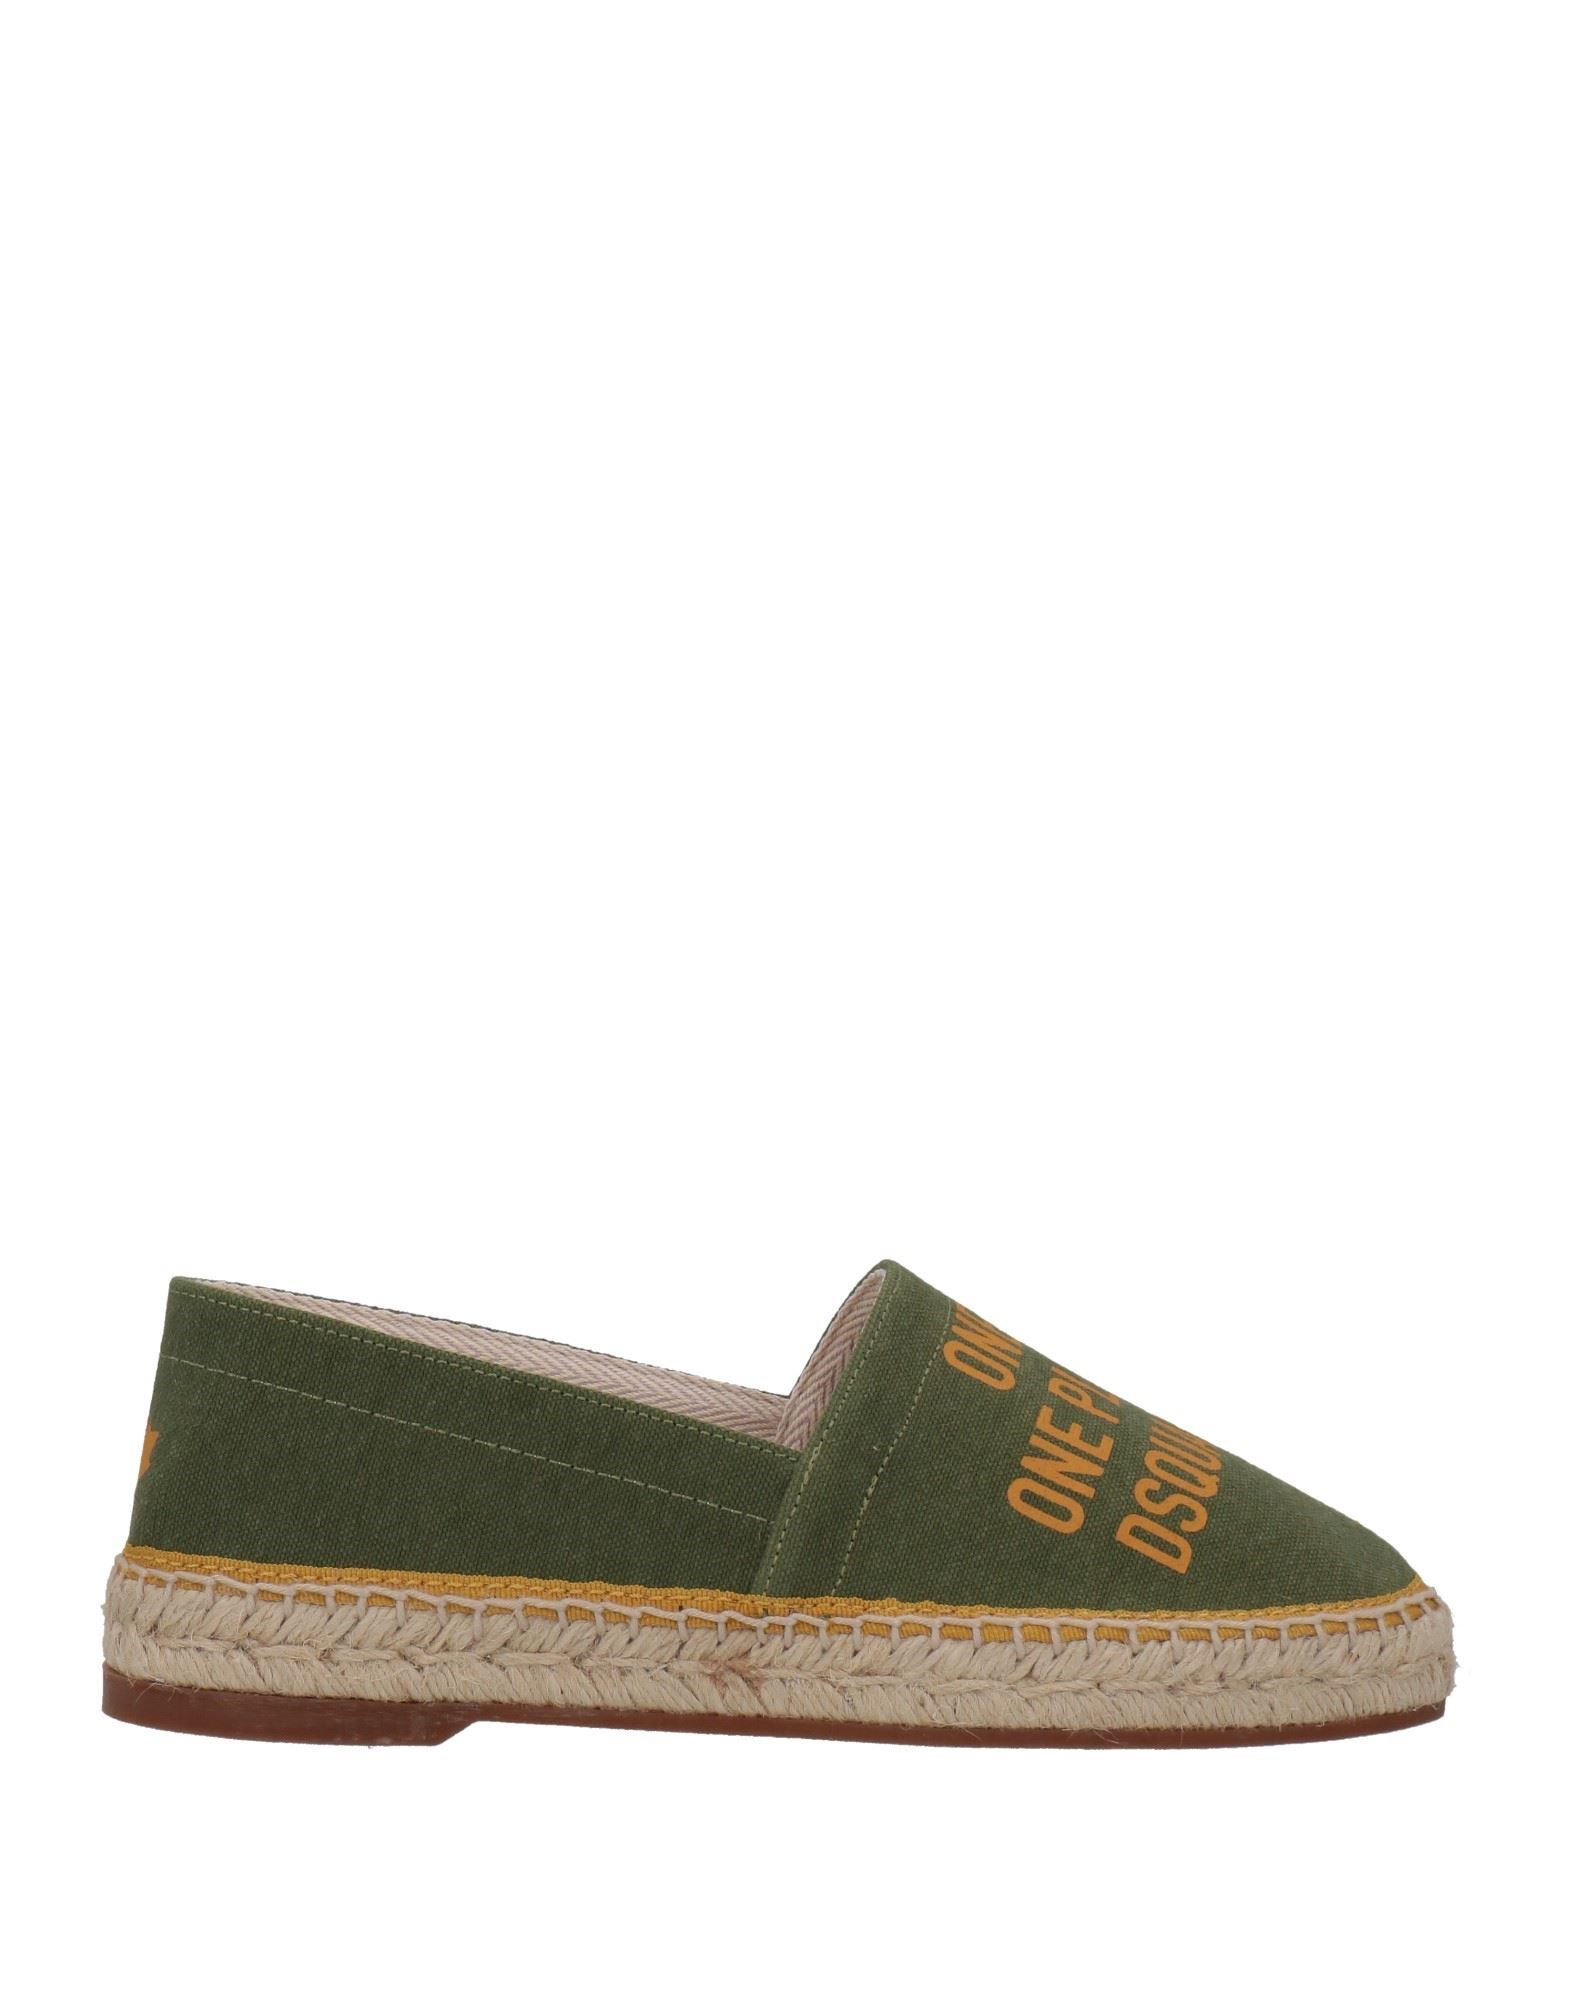 Dsquared2 Espadrilles In Military Green